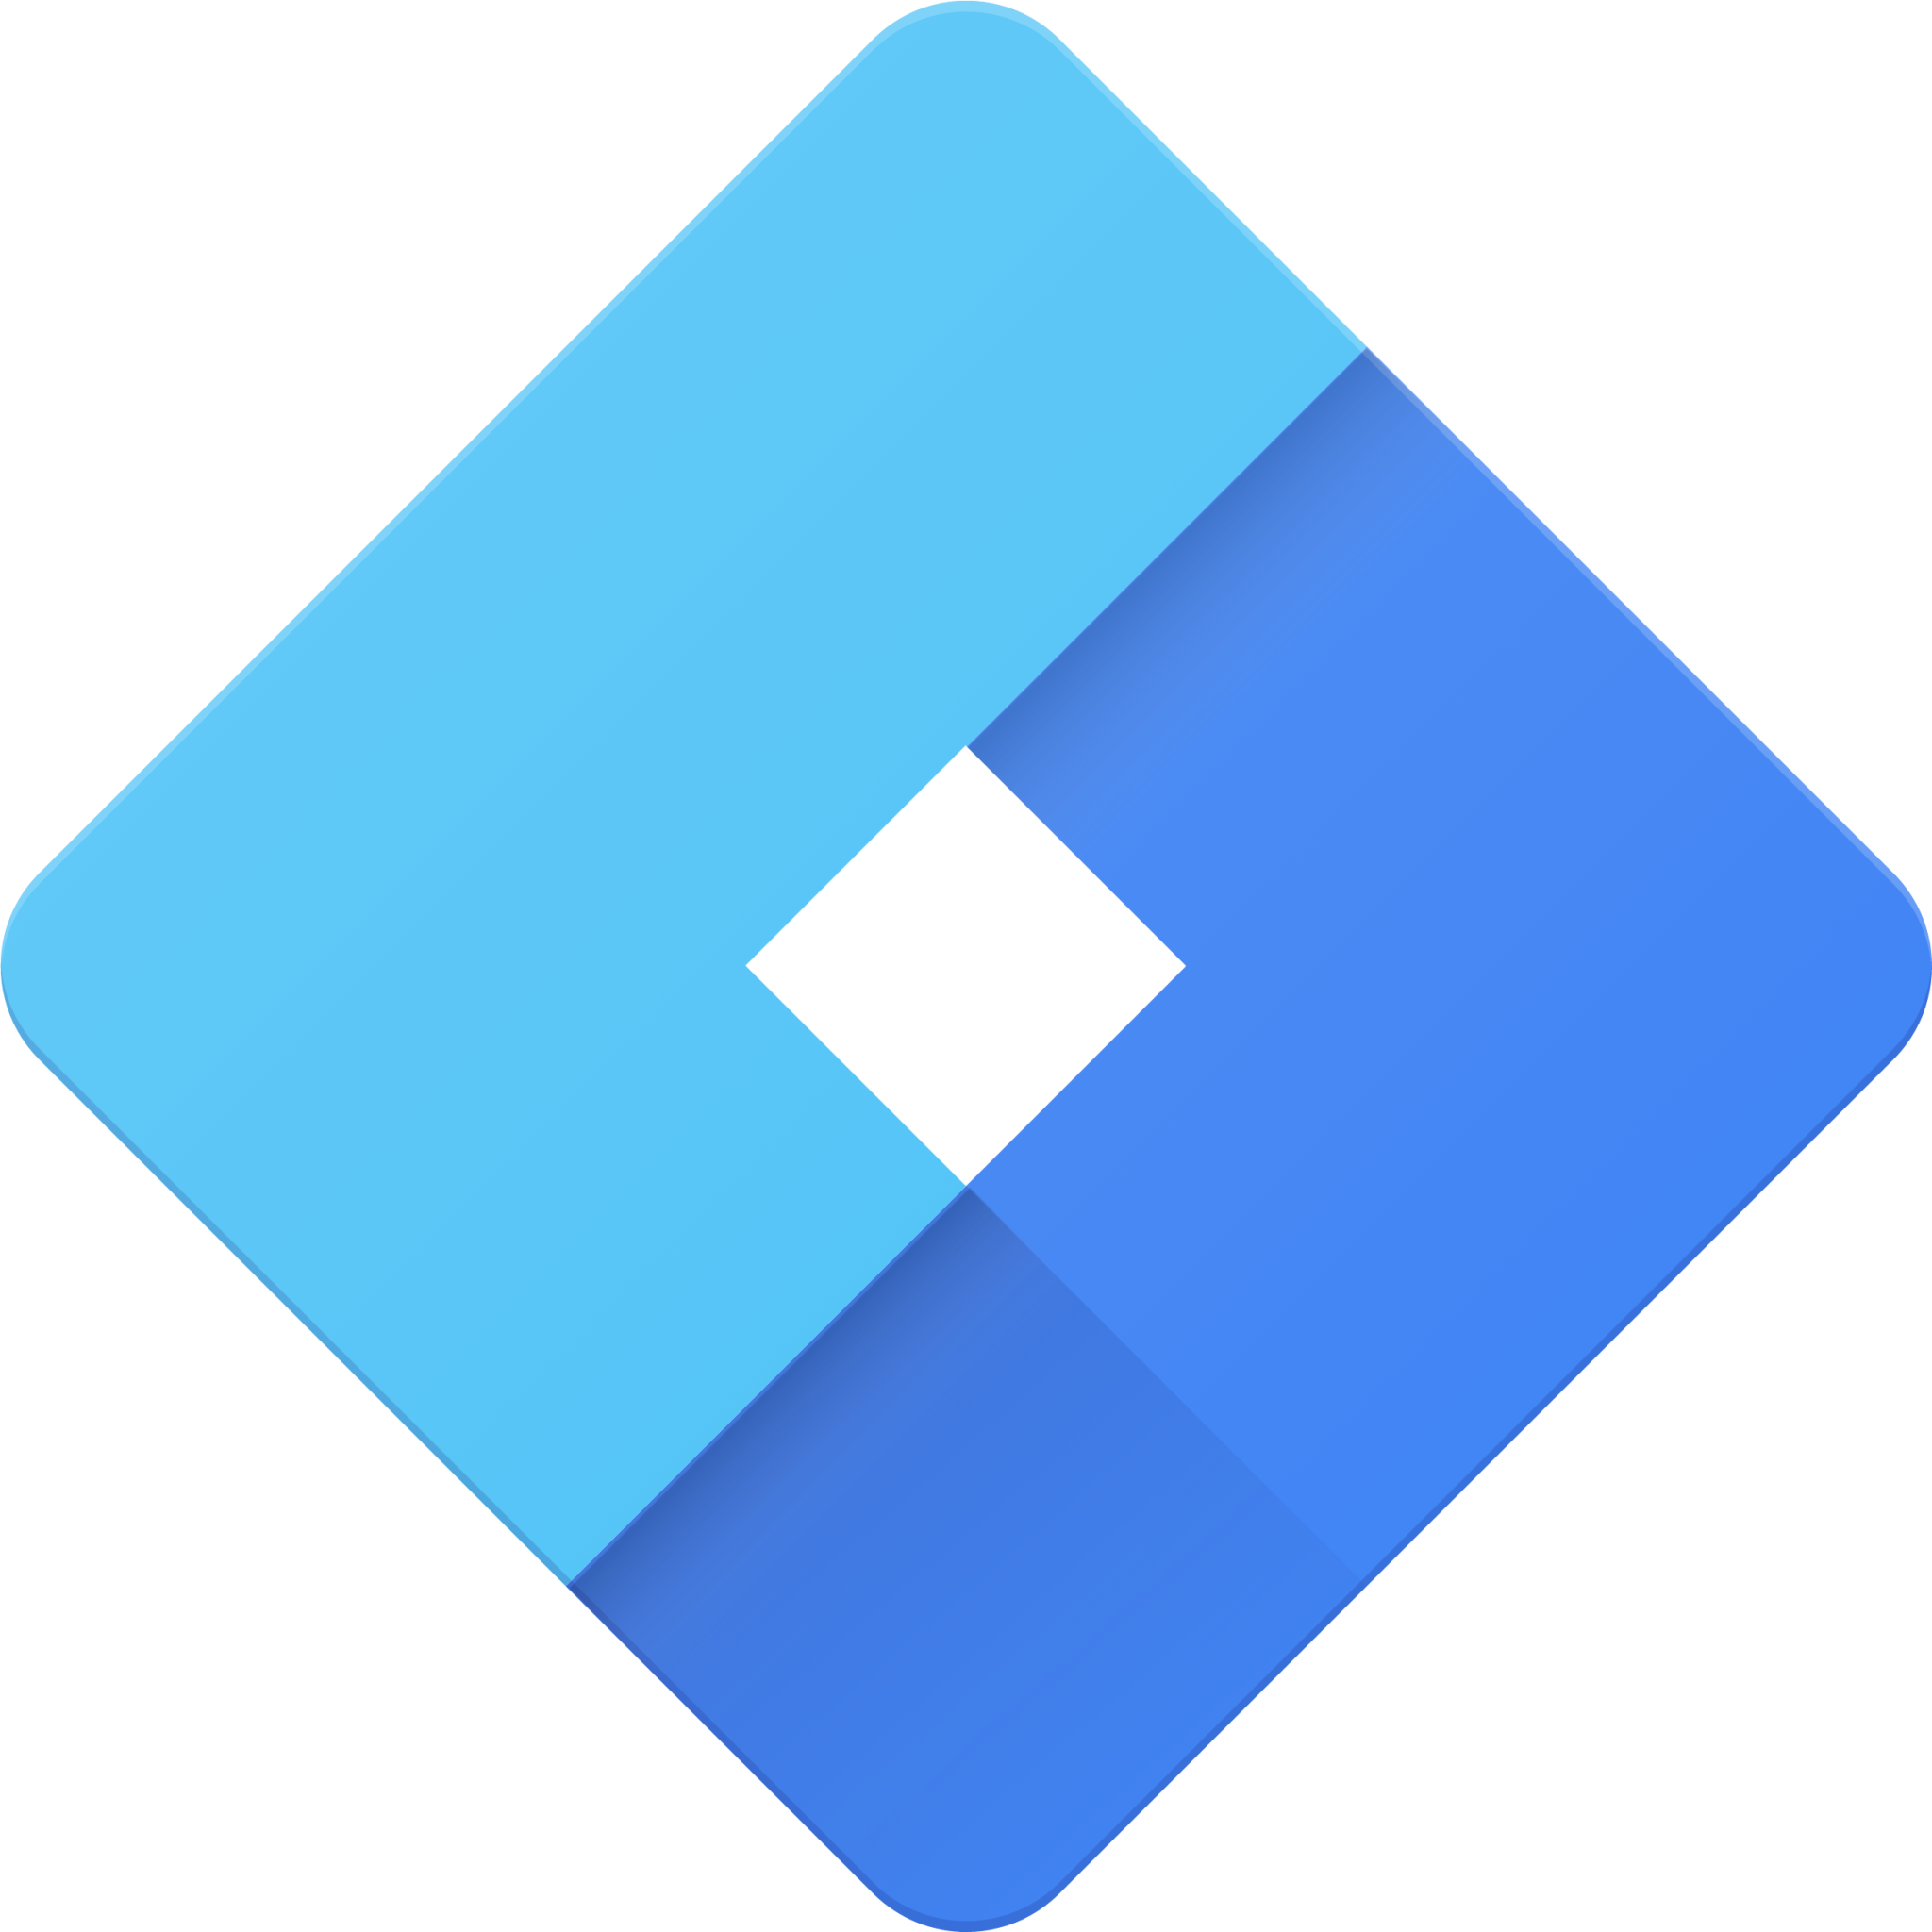 google tag manager icon